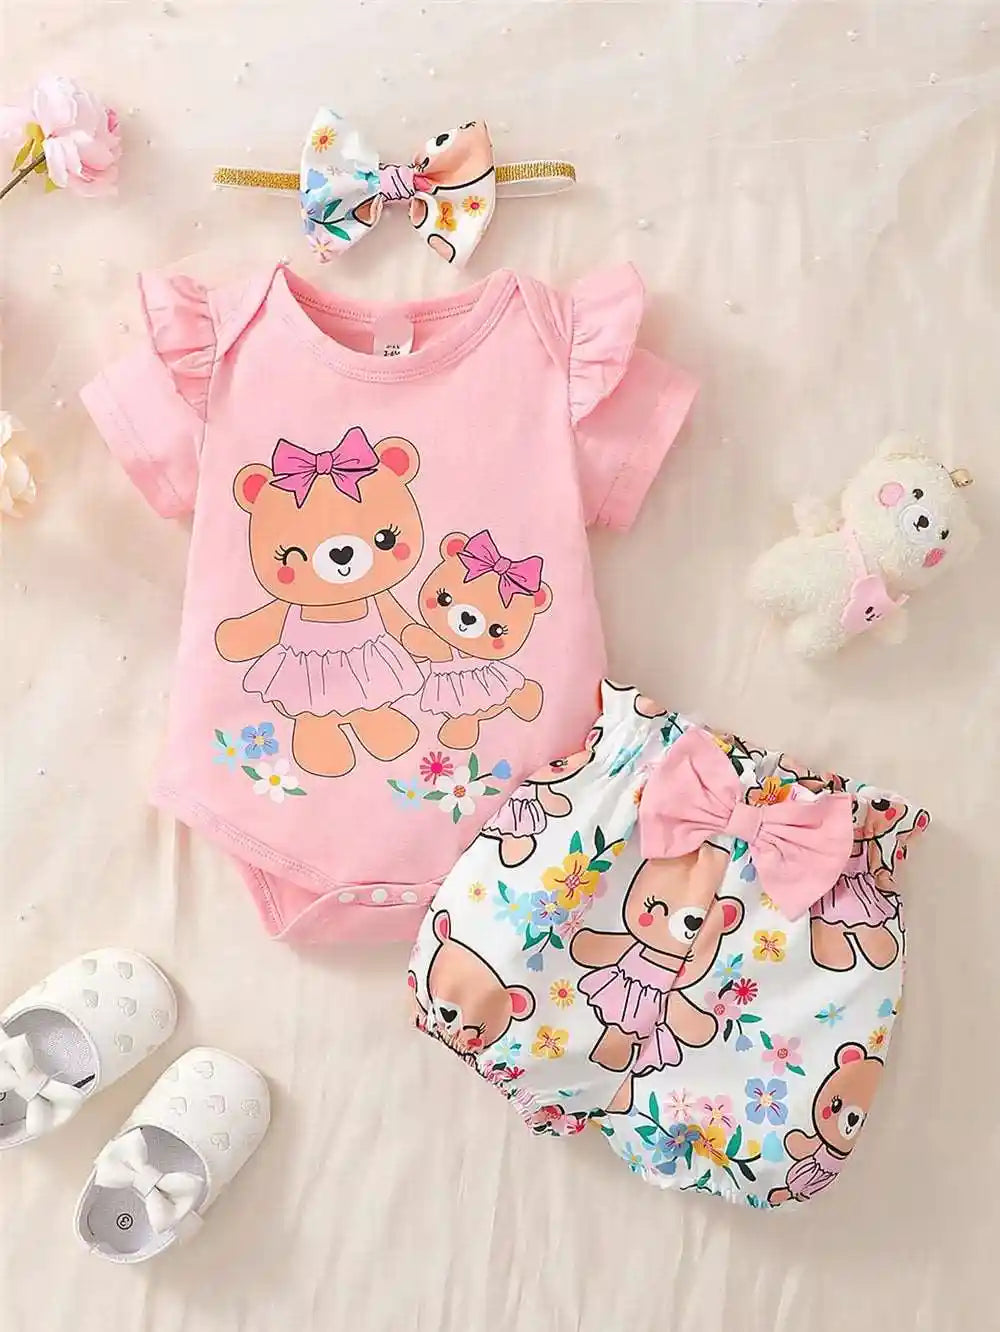 Cartoon Bear Cutie: 3-Piece Baby Outfit - For all baby